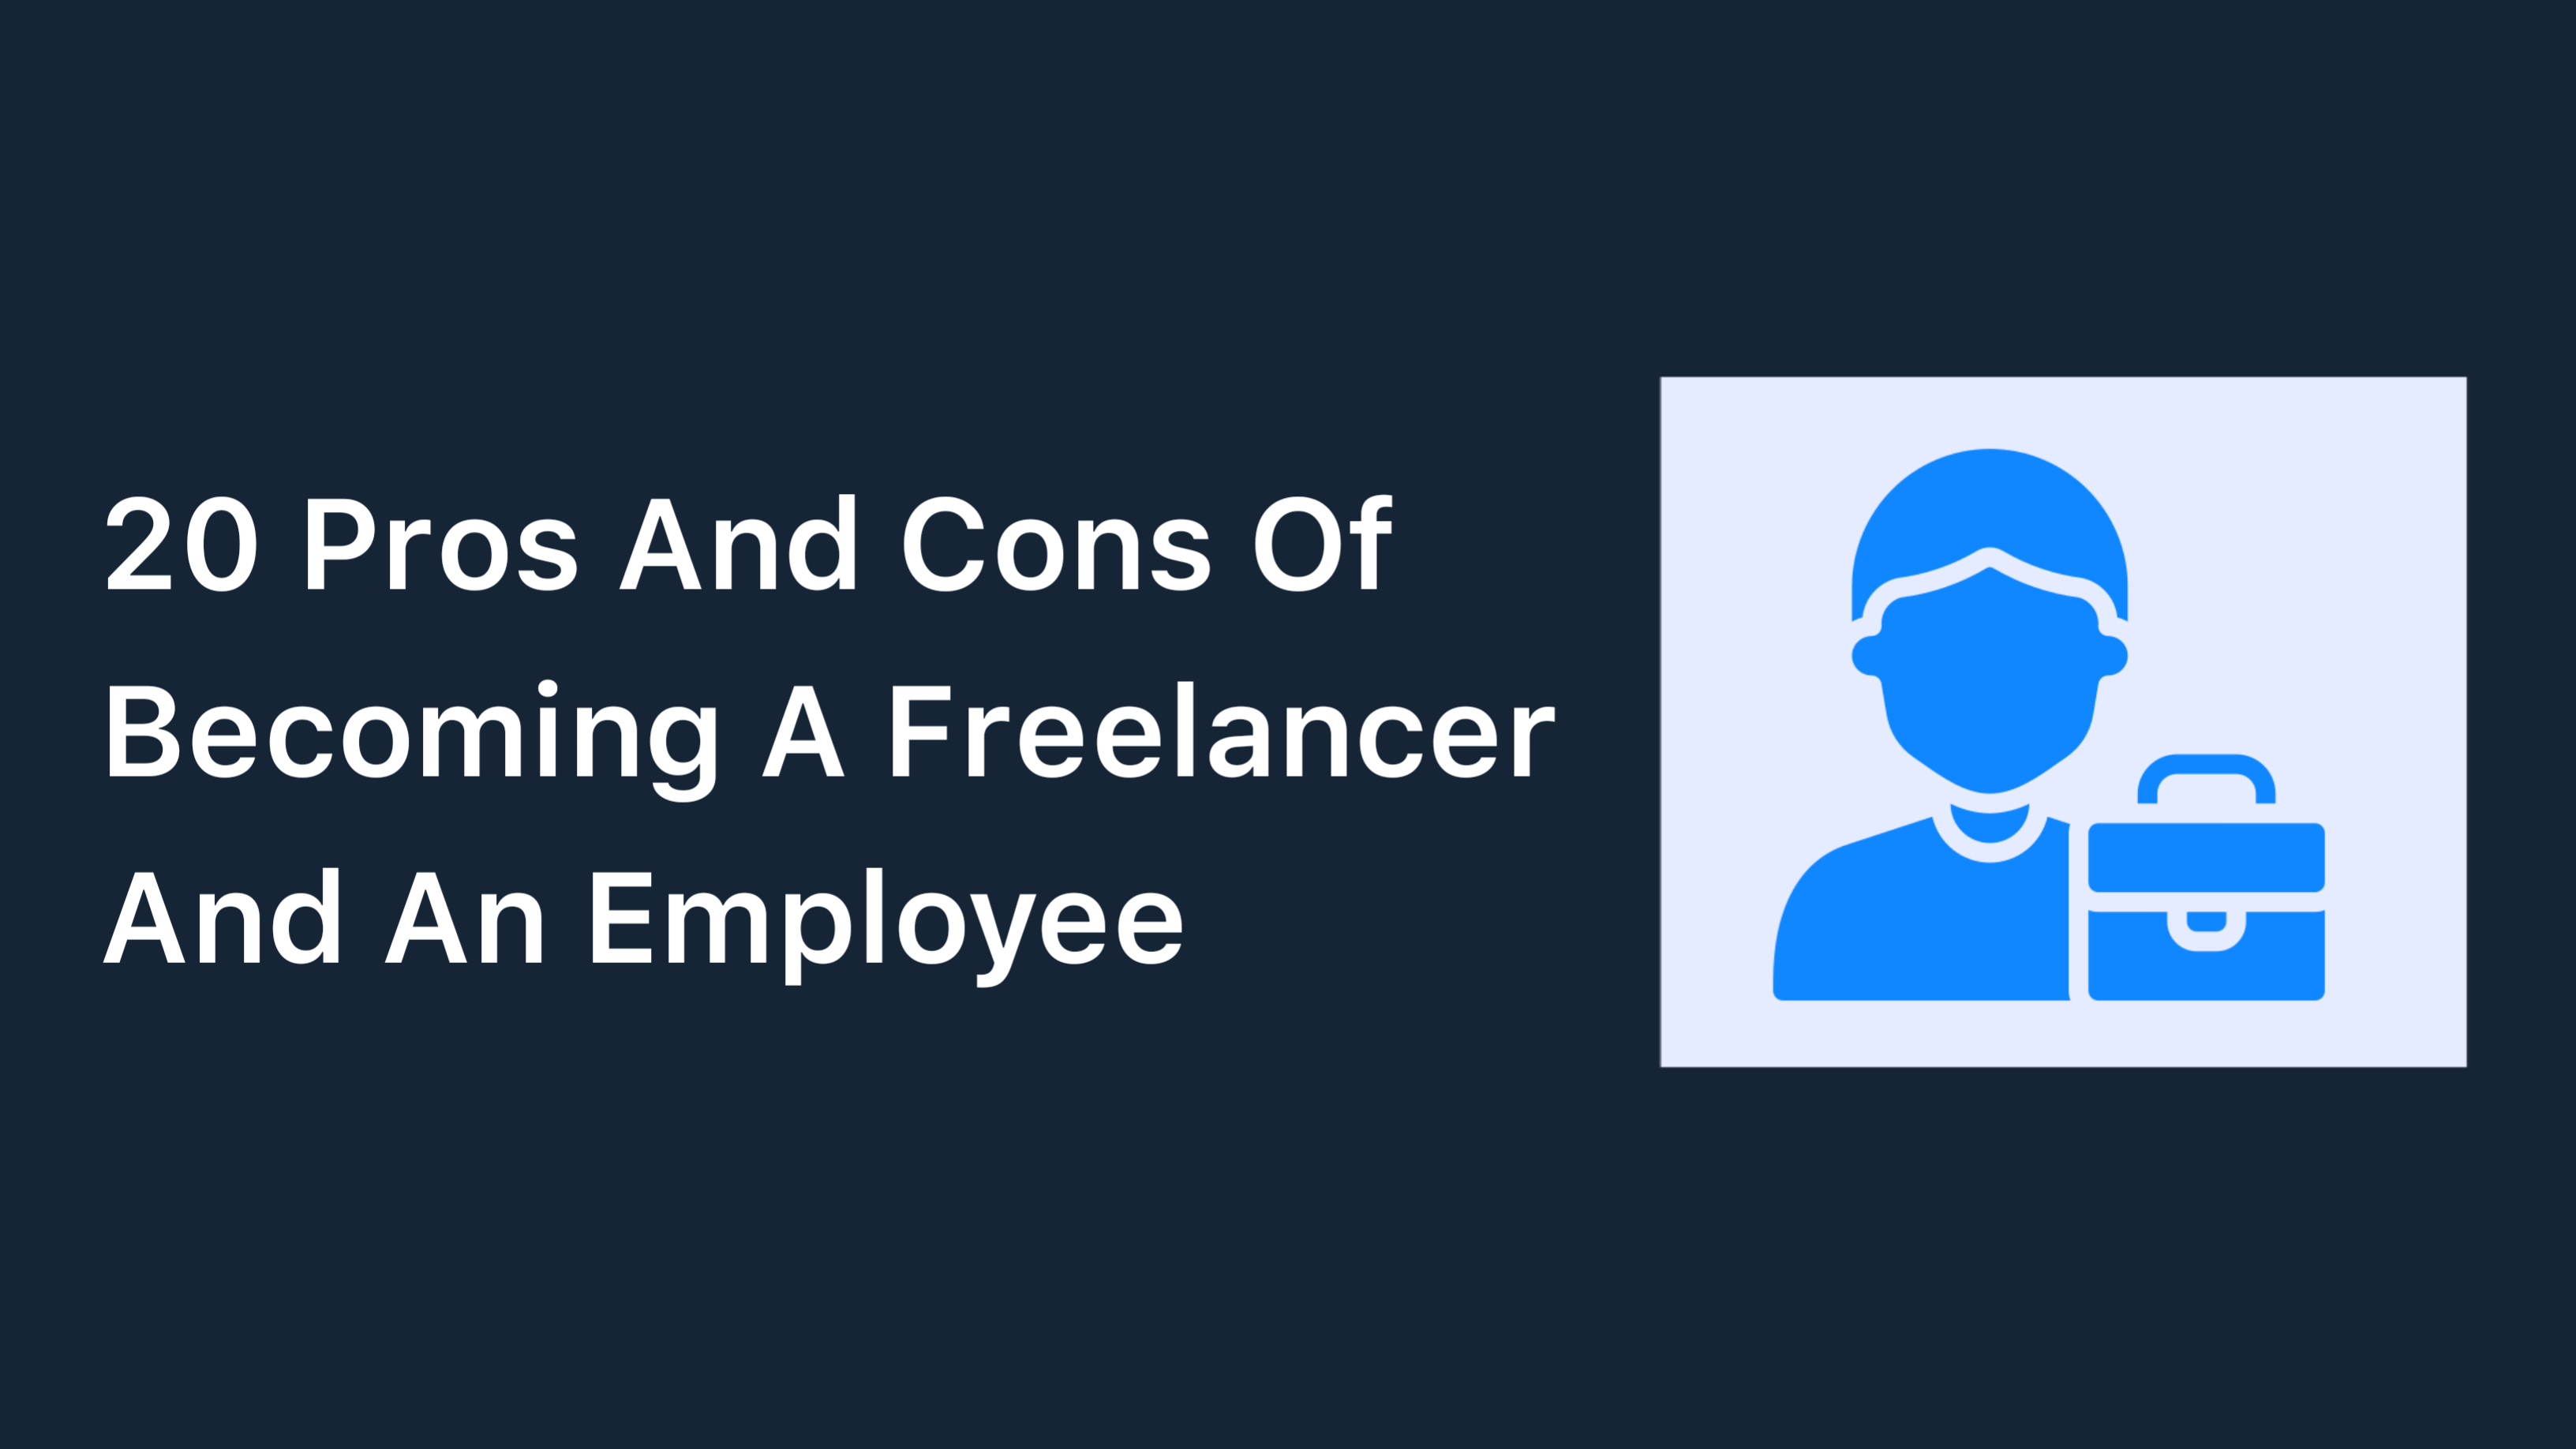 20 Pros And Cons Of A Freelancer And An Employee